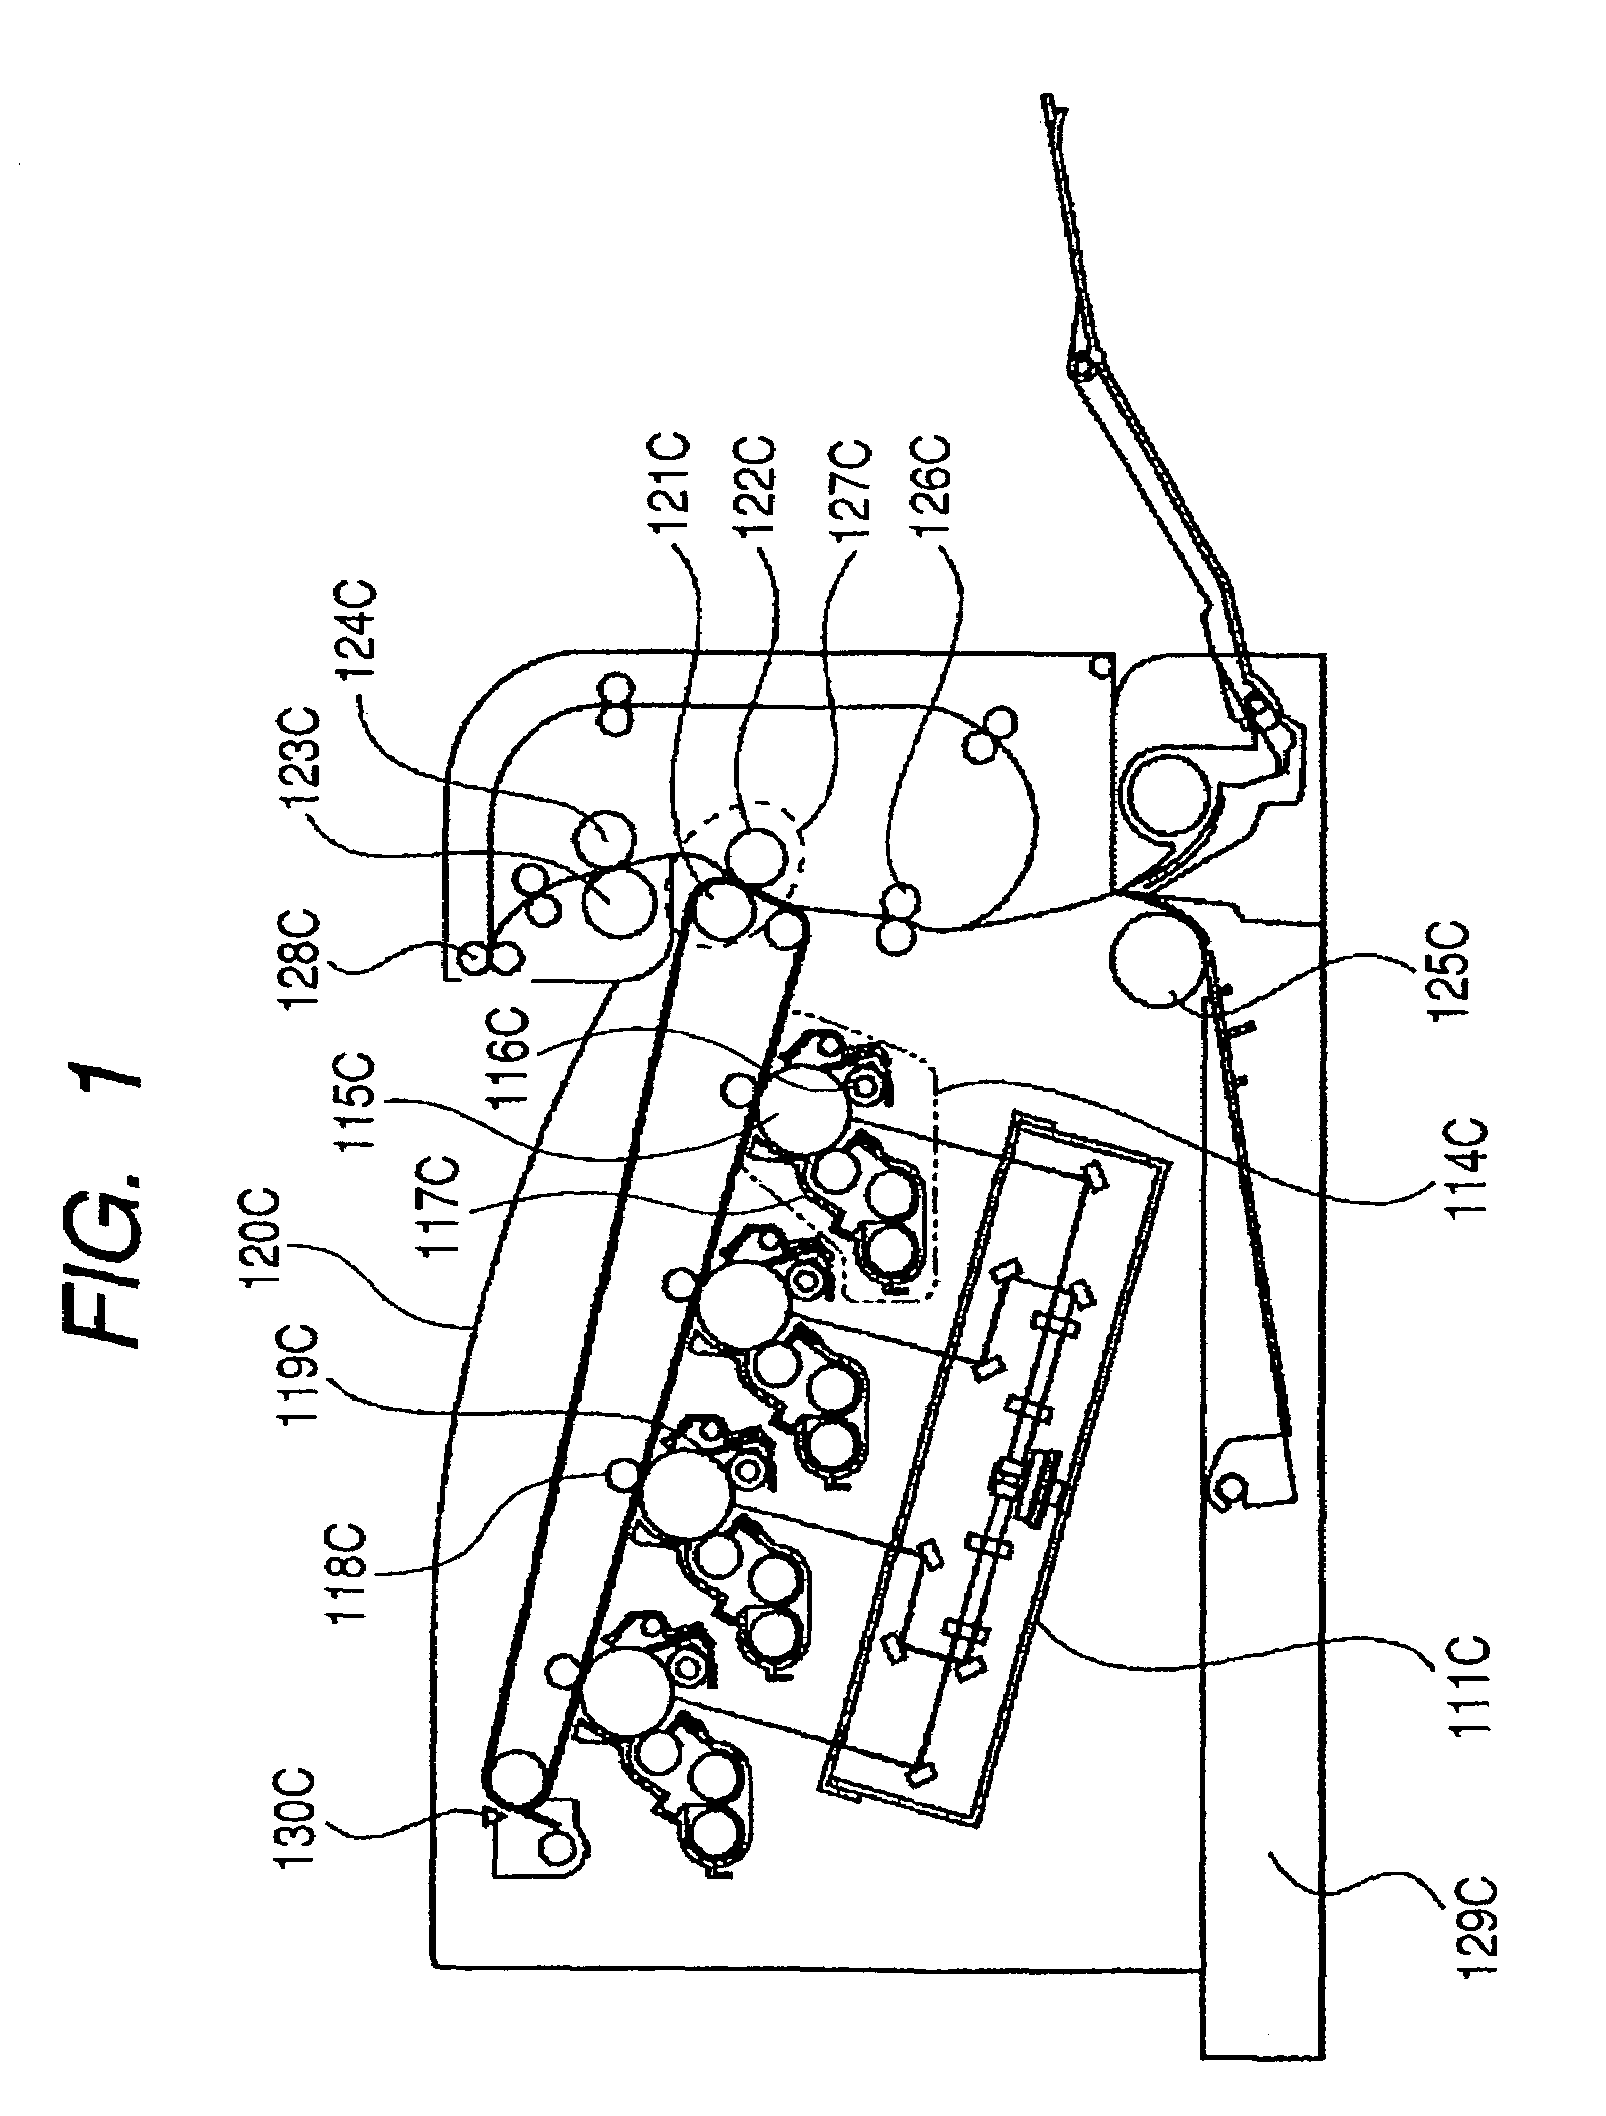 Cartridge detachably mounted to an image forming apparatus including a lock member engagable with a wall of the image forming apparatus